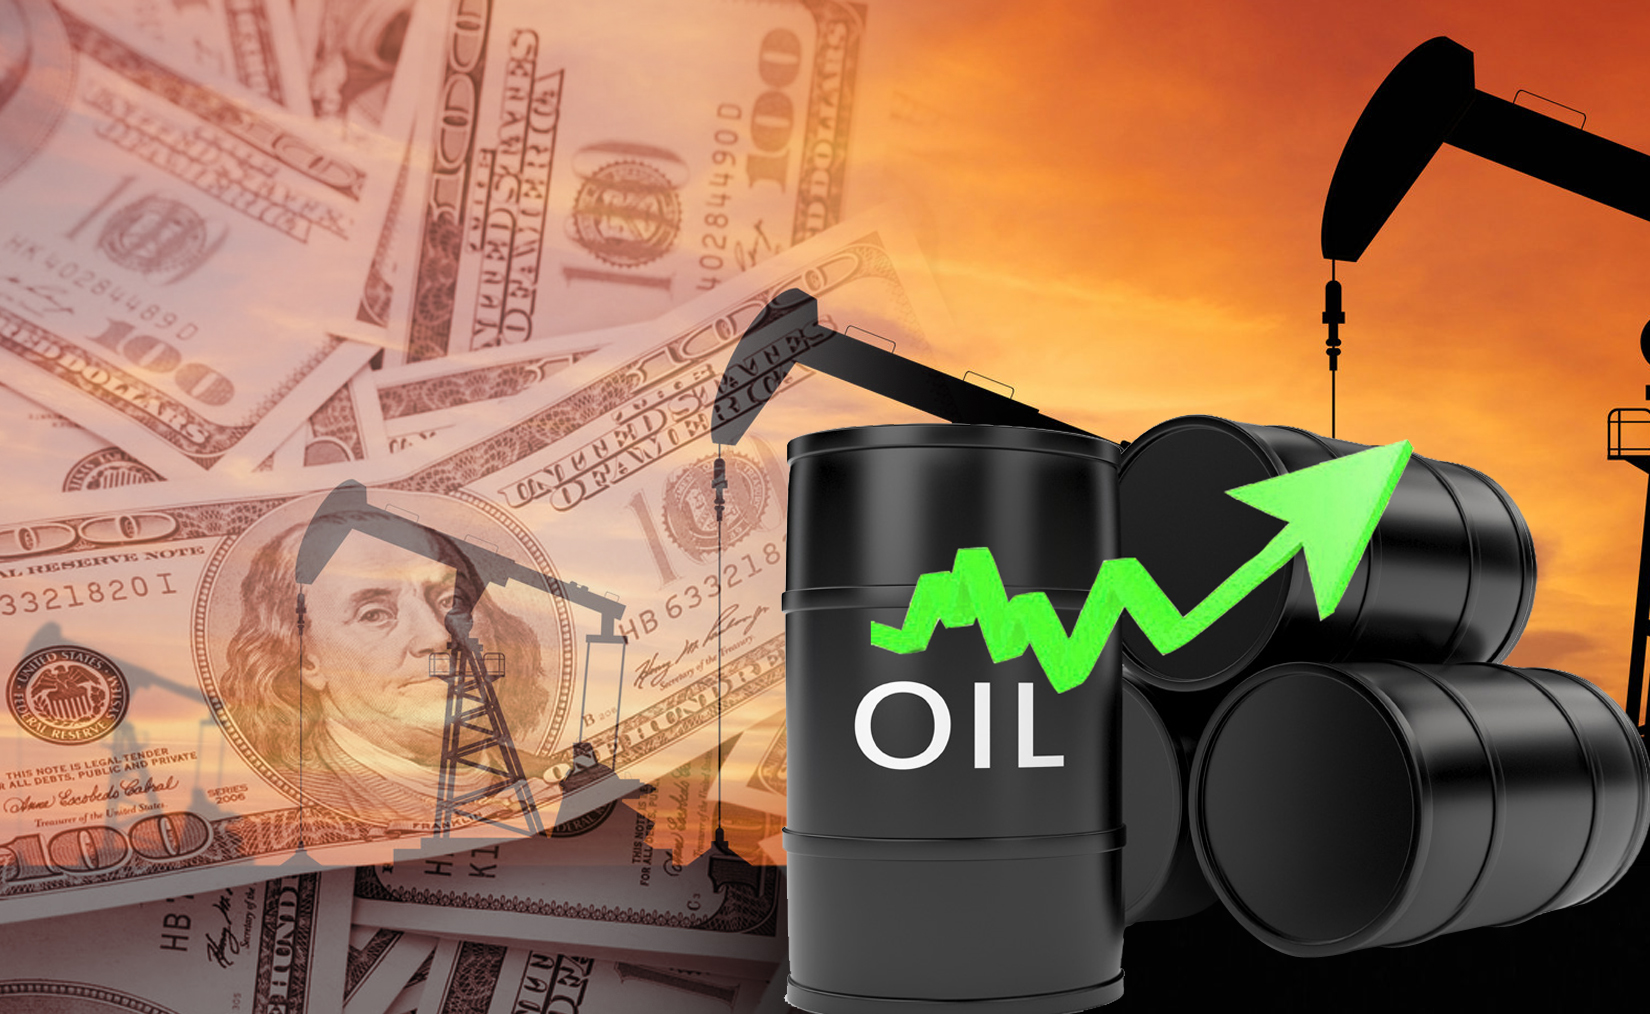 Kuwait oil price up 69 cents to USD 50.97 pb                                                                                                                                                                                                              